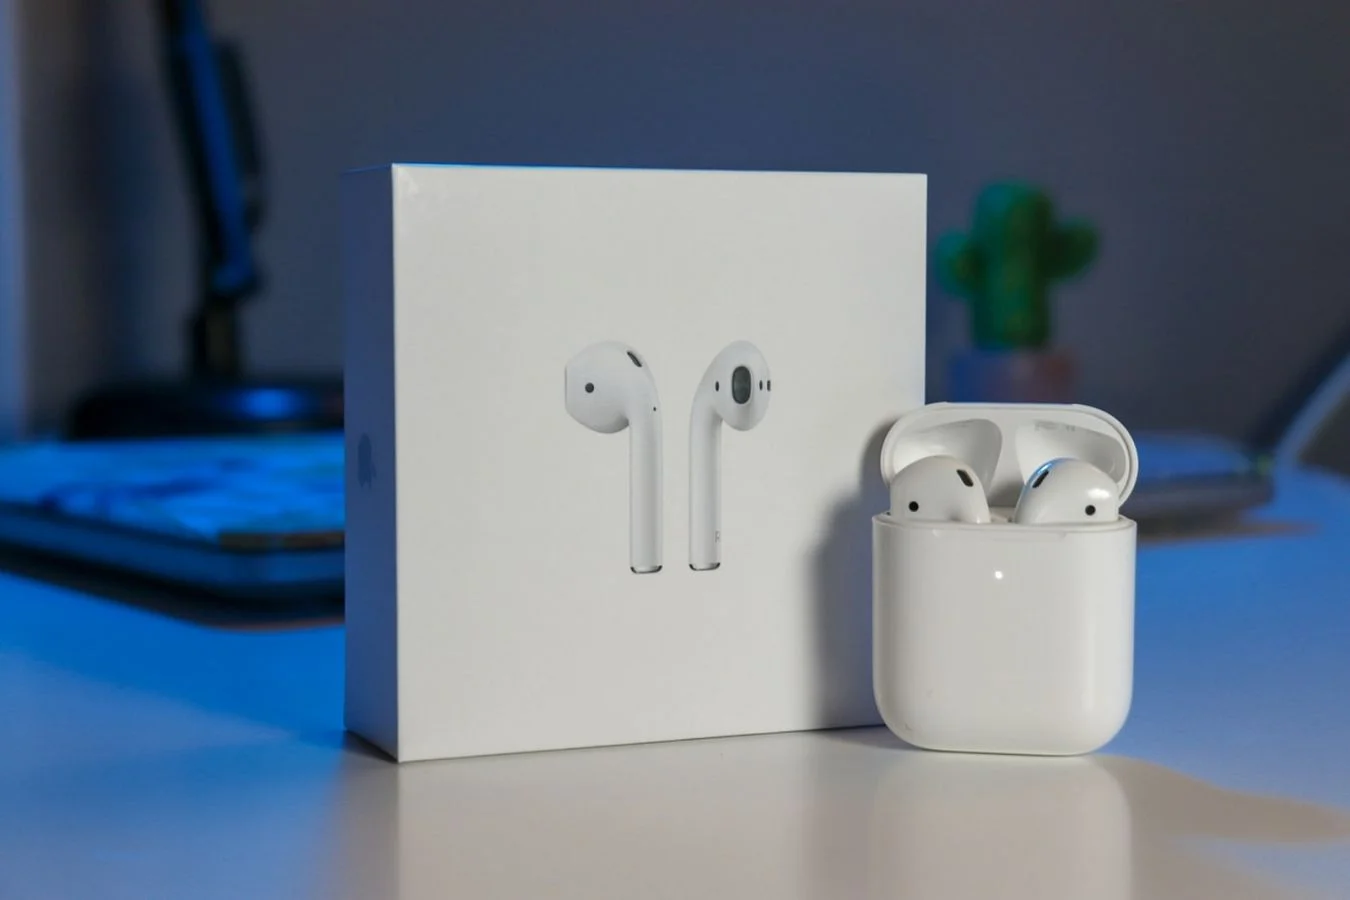 Chinese police bust a large network of counterfeit AirPods production